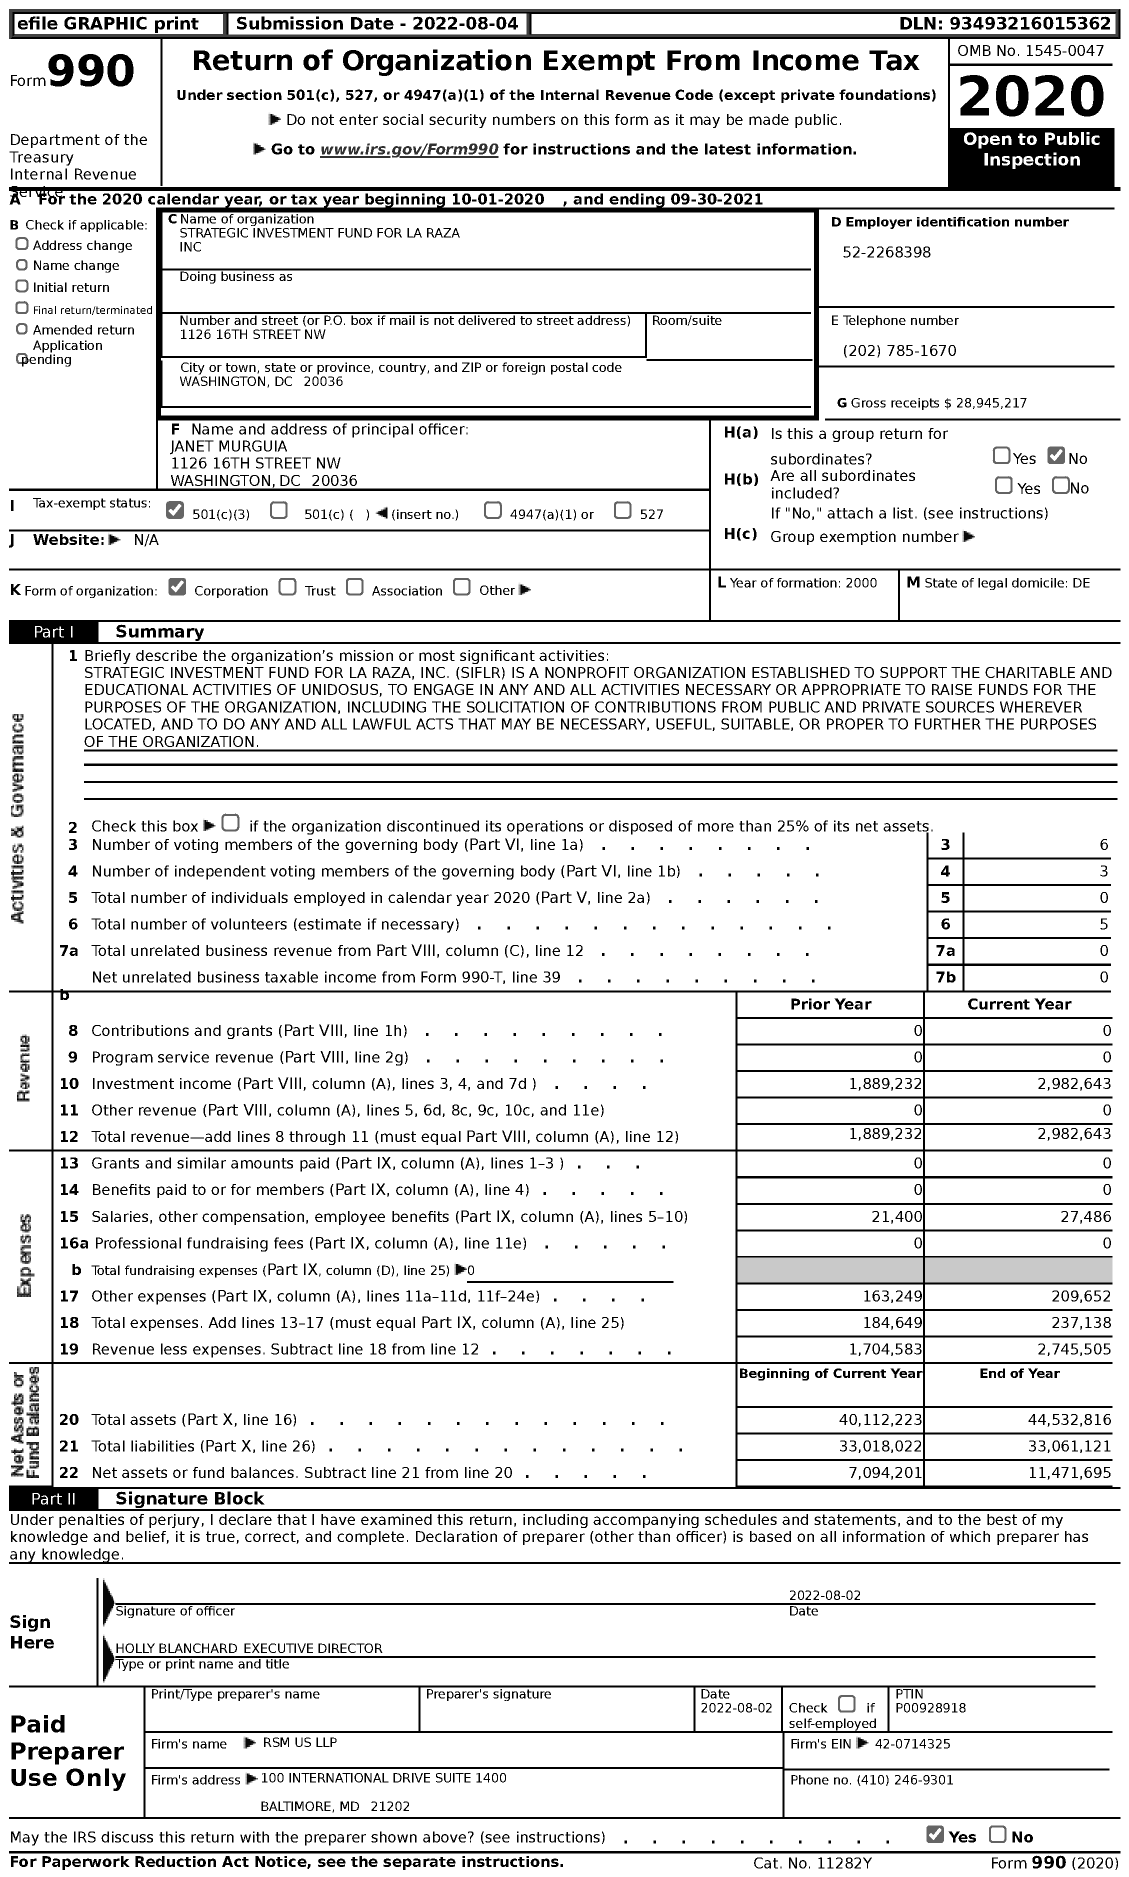 Image of first page of 2020 Form 990 for Strategic Investment Fund for La Raza (SIFLR)